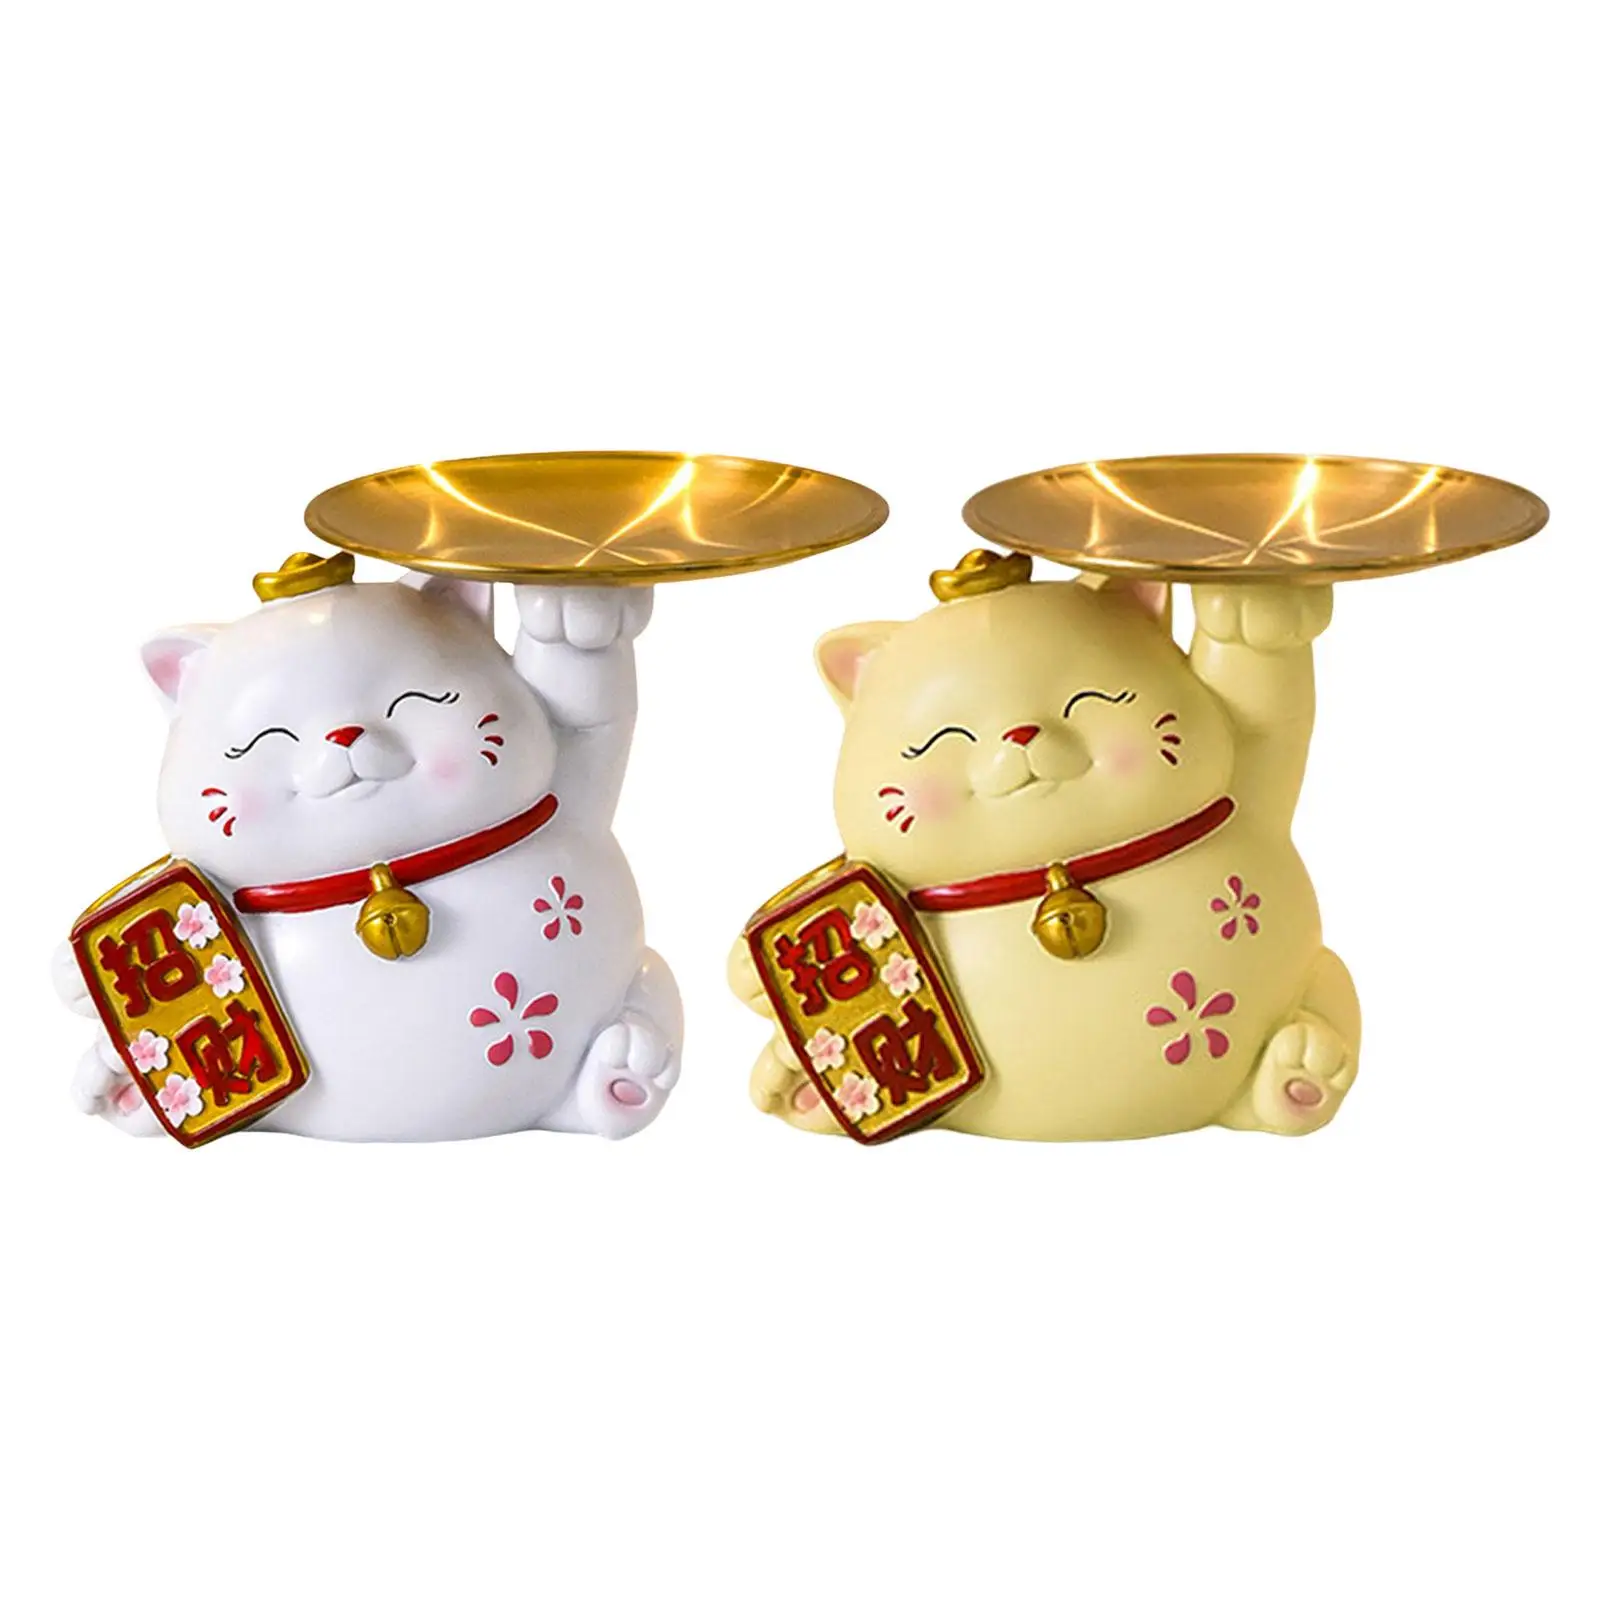 

Cute Lucky Cat Statue Home Decor Resin Figurine Keys Holder Jewelry Trinket Tray for Drawing Room Restaurant Bar Entryway Cafe